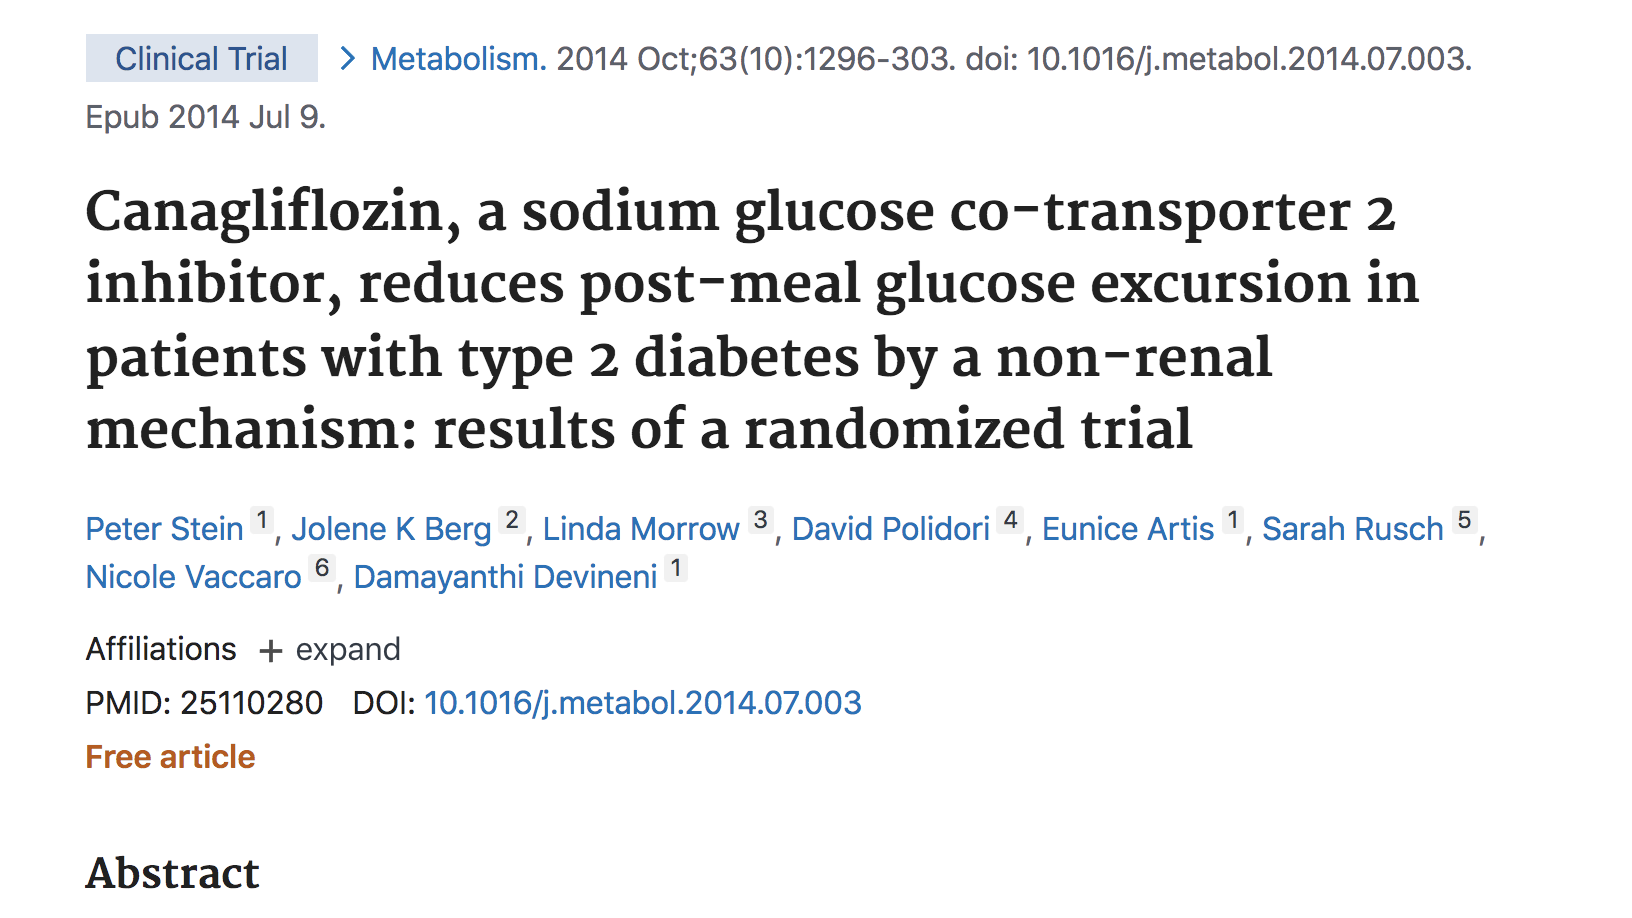 image of Canagliflozin, a sodium glucose co-transporter 2 inhibitor, reduces post-meal glucose excursion in patients with type 2 diabetes by a non-renal mechanism: results of a randomized trial